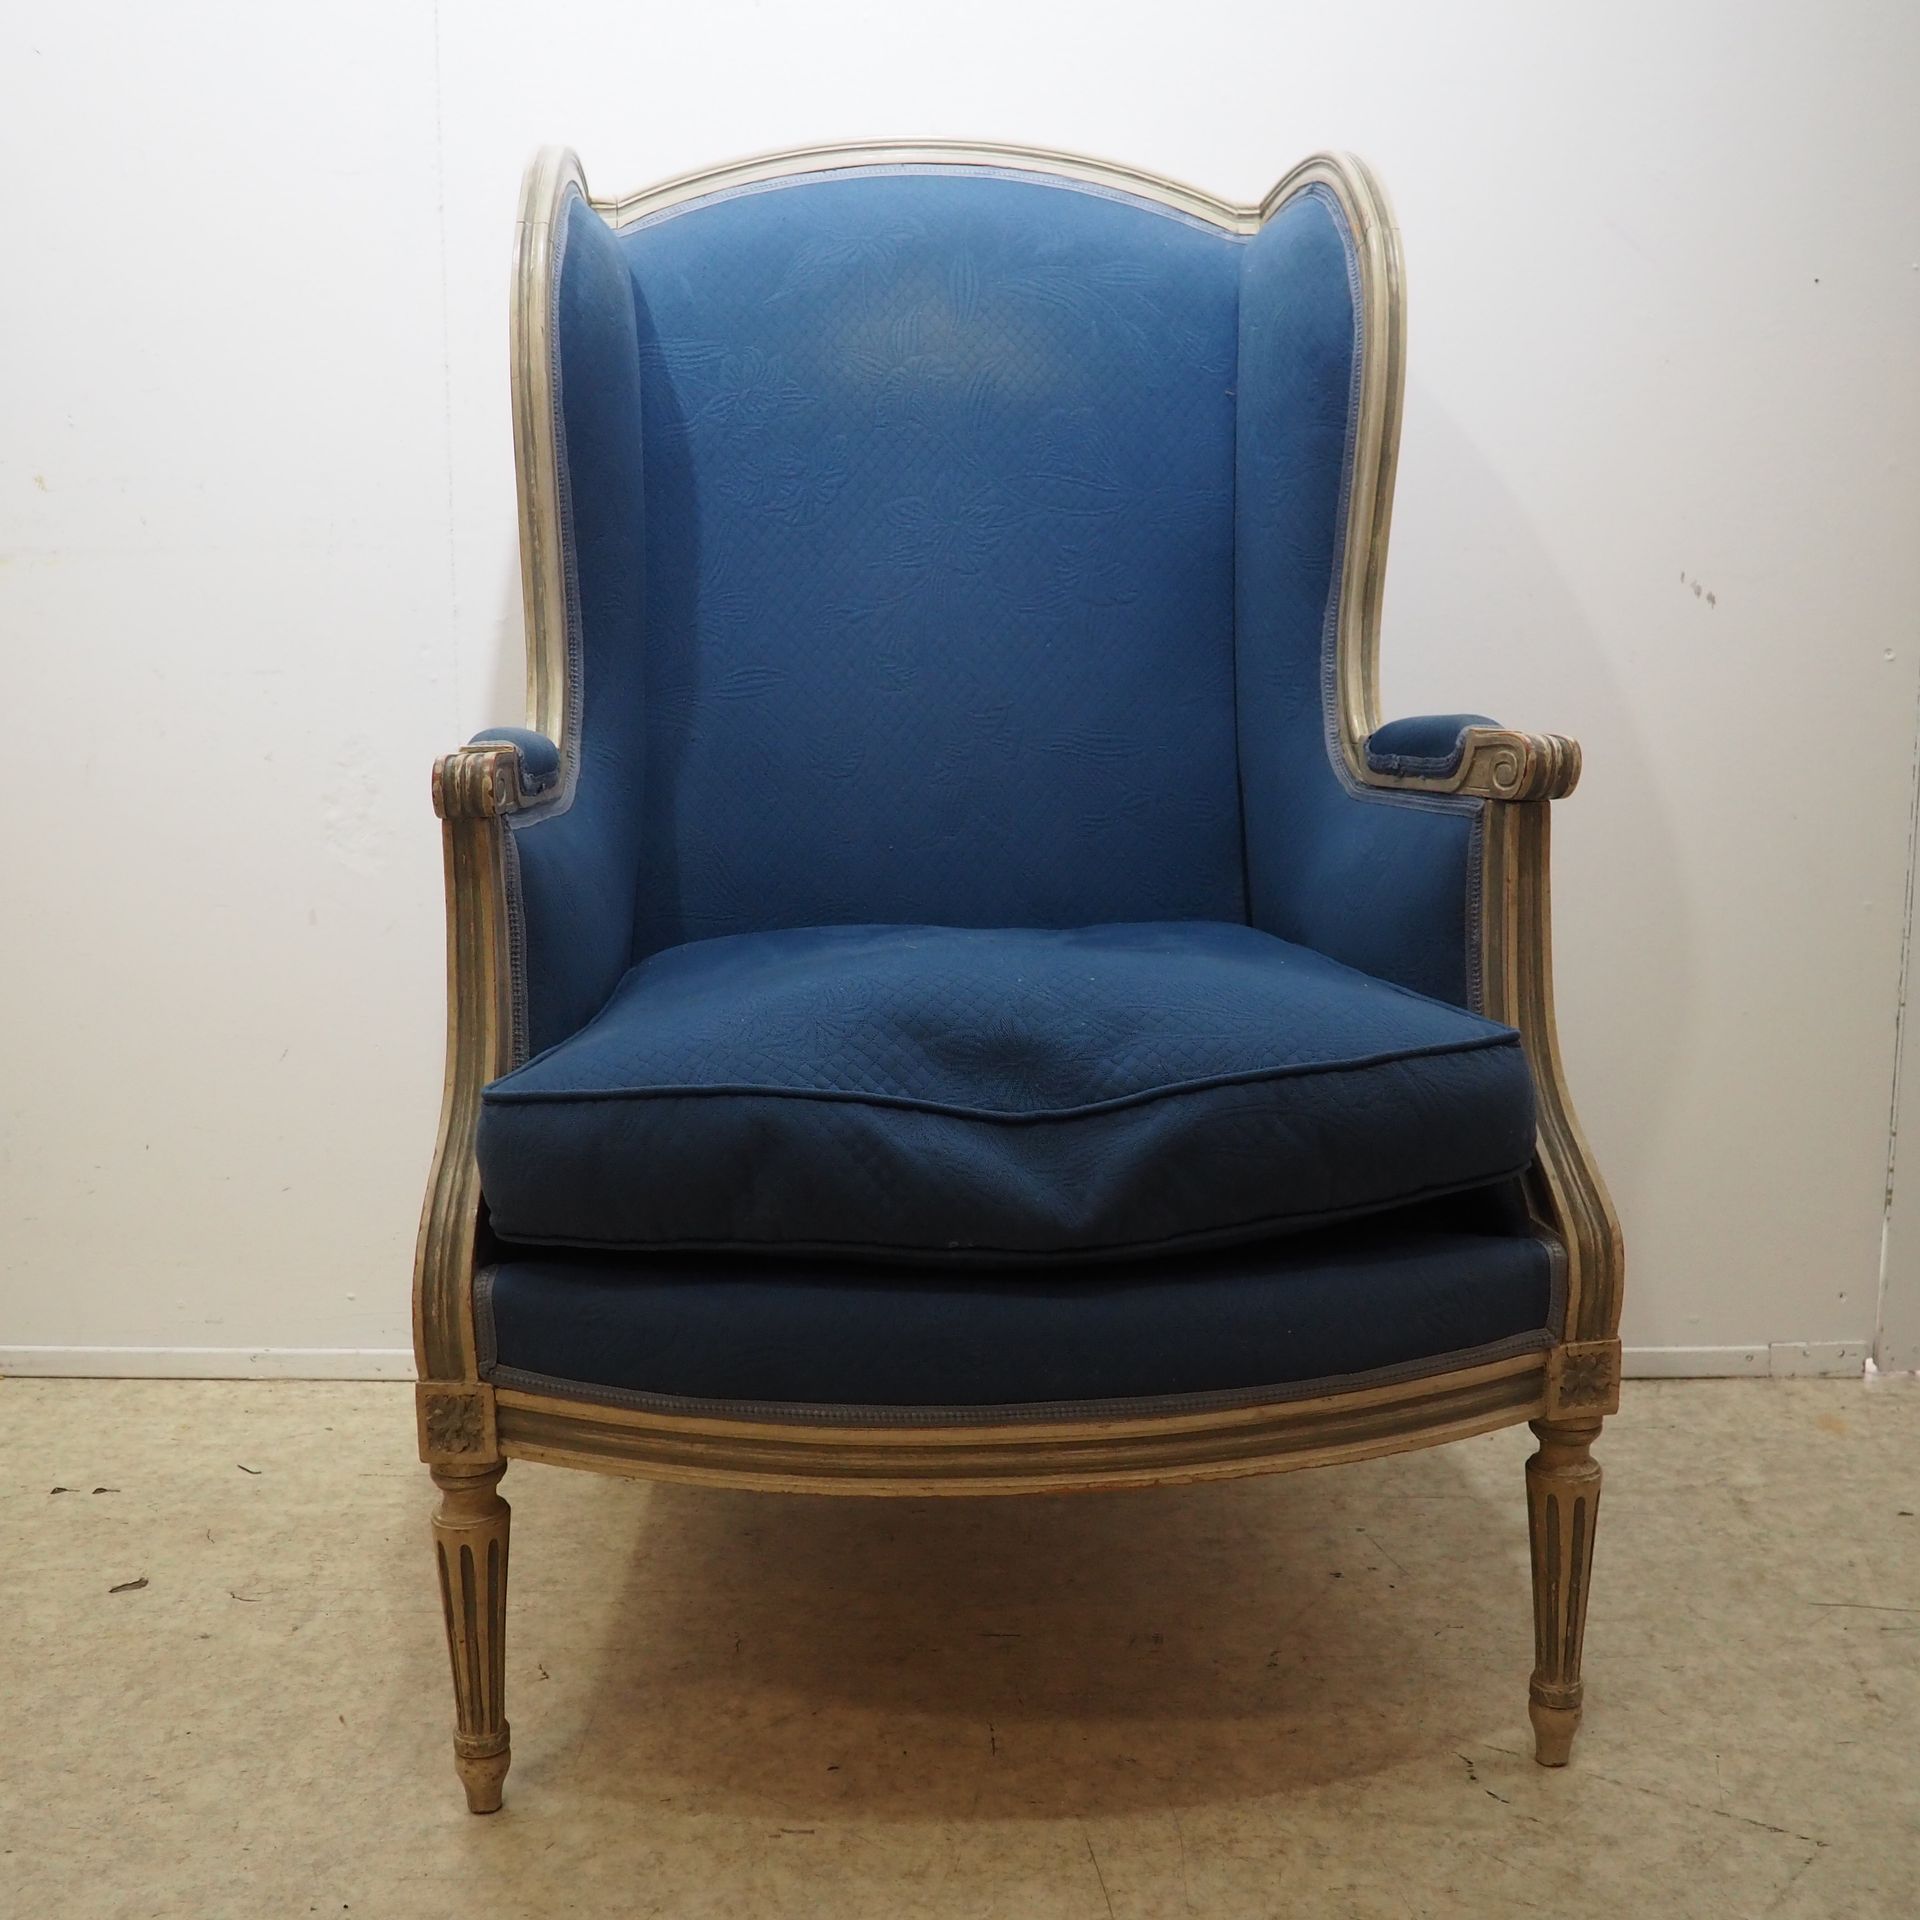 Null Bergère (armchair) circa 1950 Louis XVI style : Solid carved and polychrome&hellip;